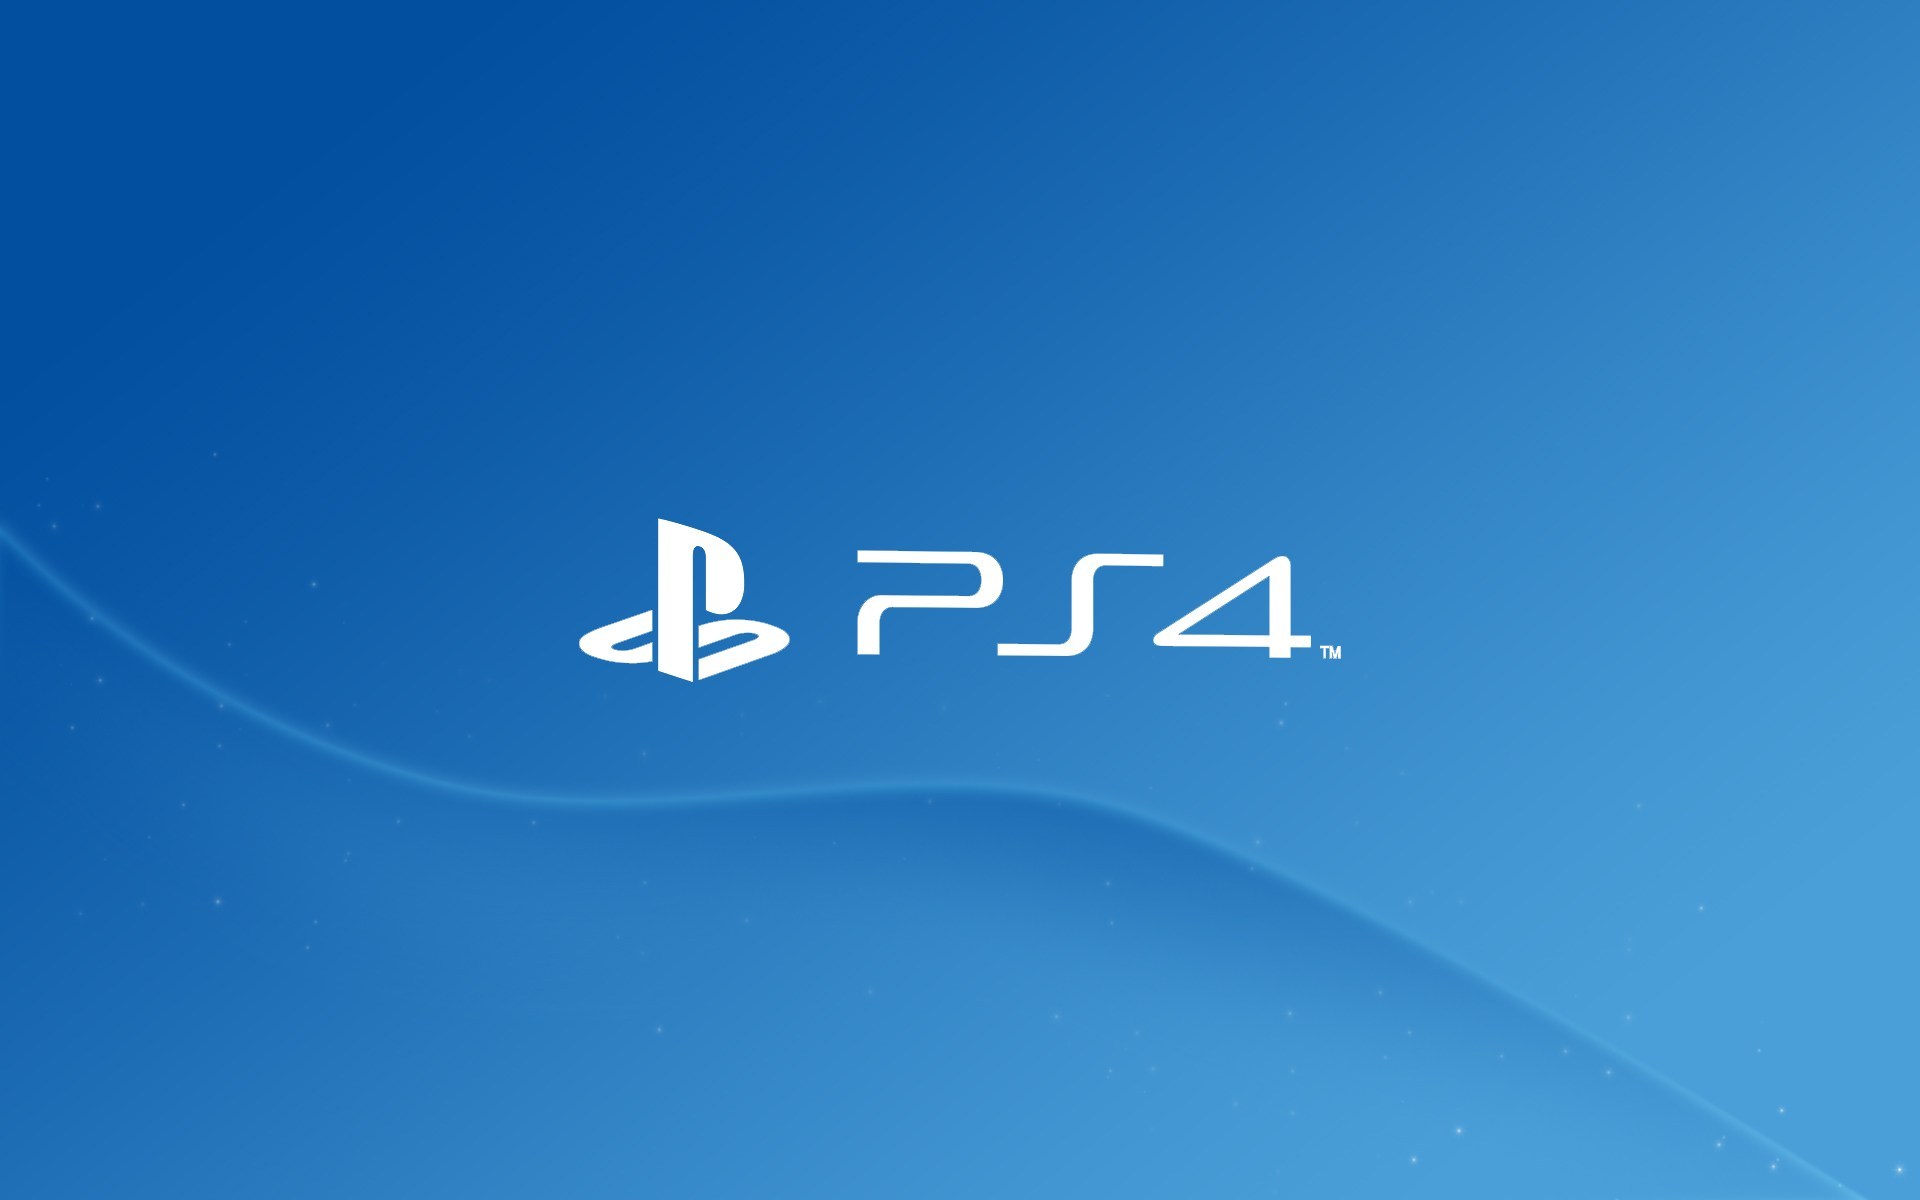 How to delete a PS4 account